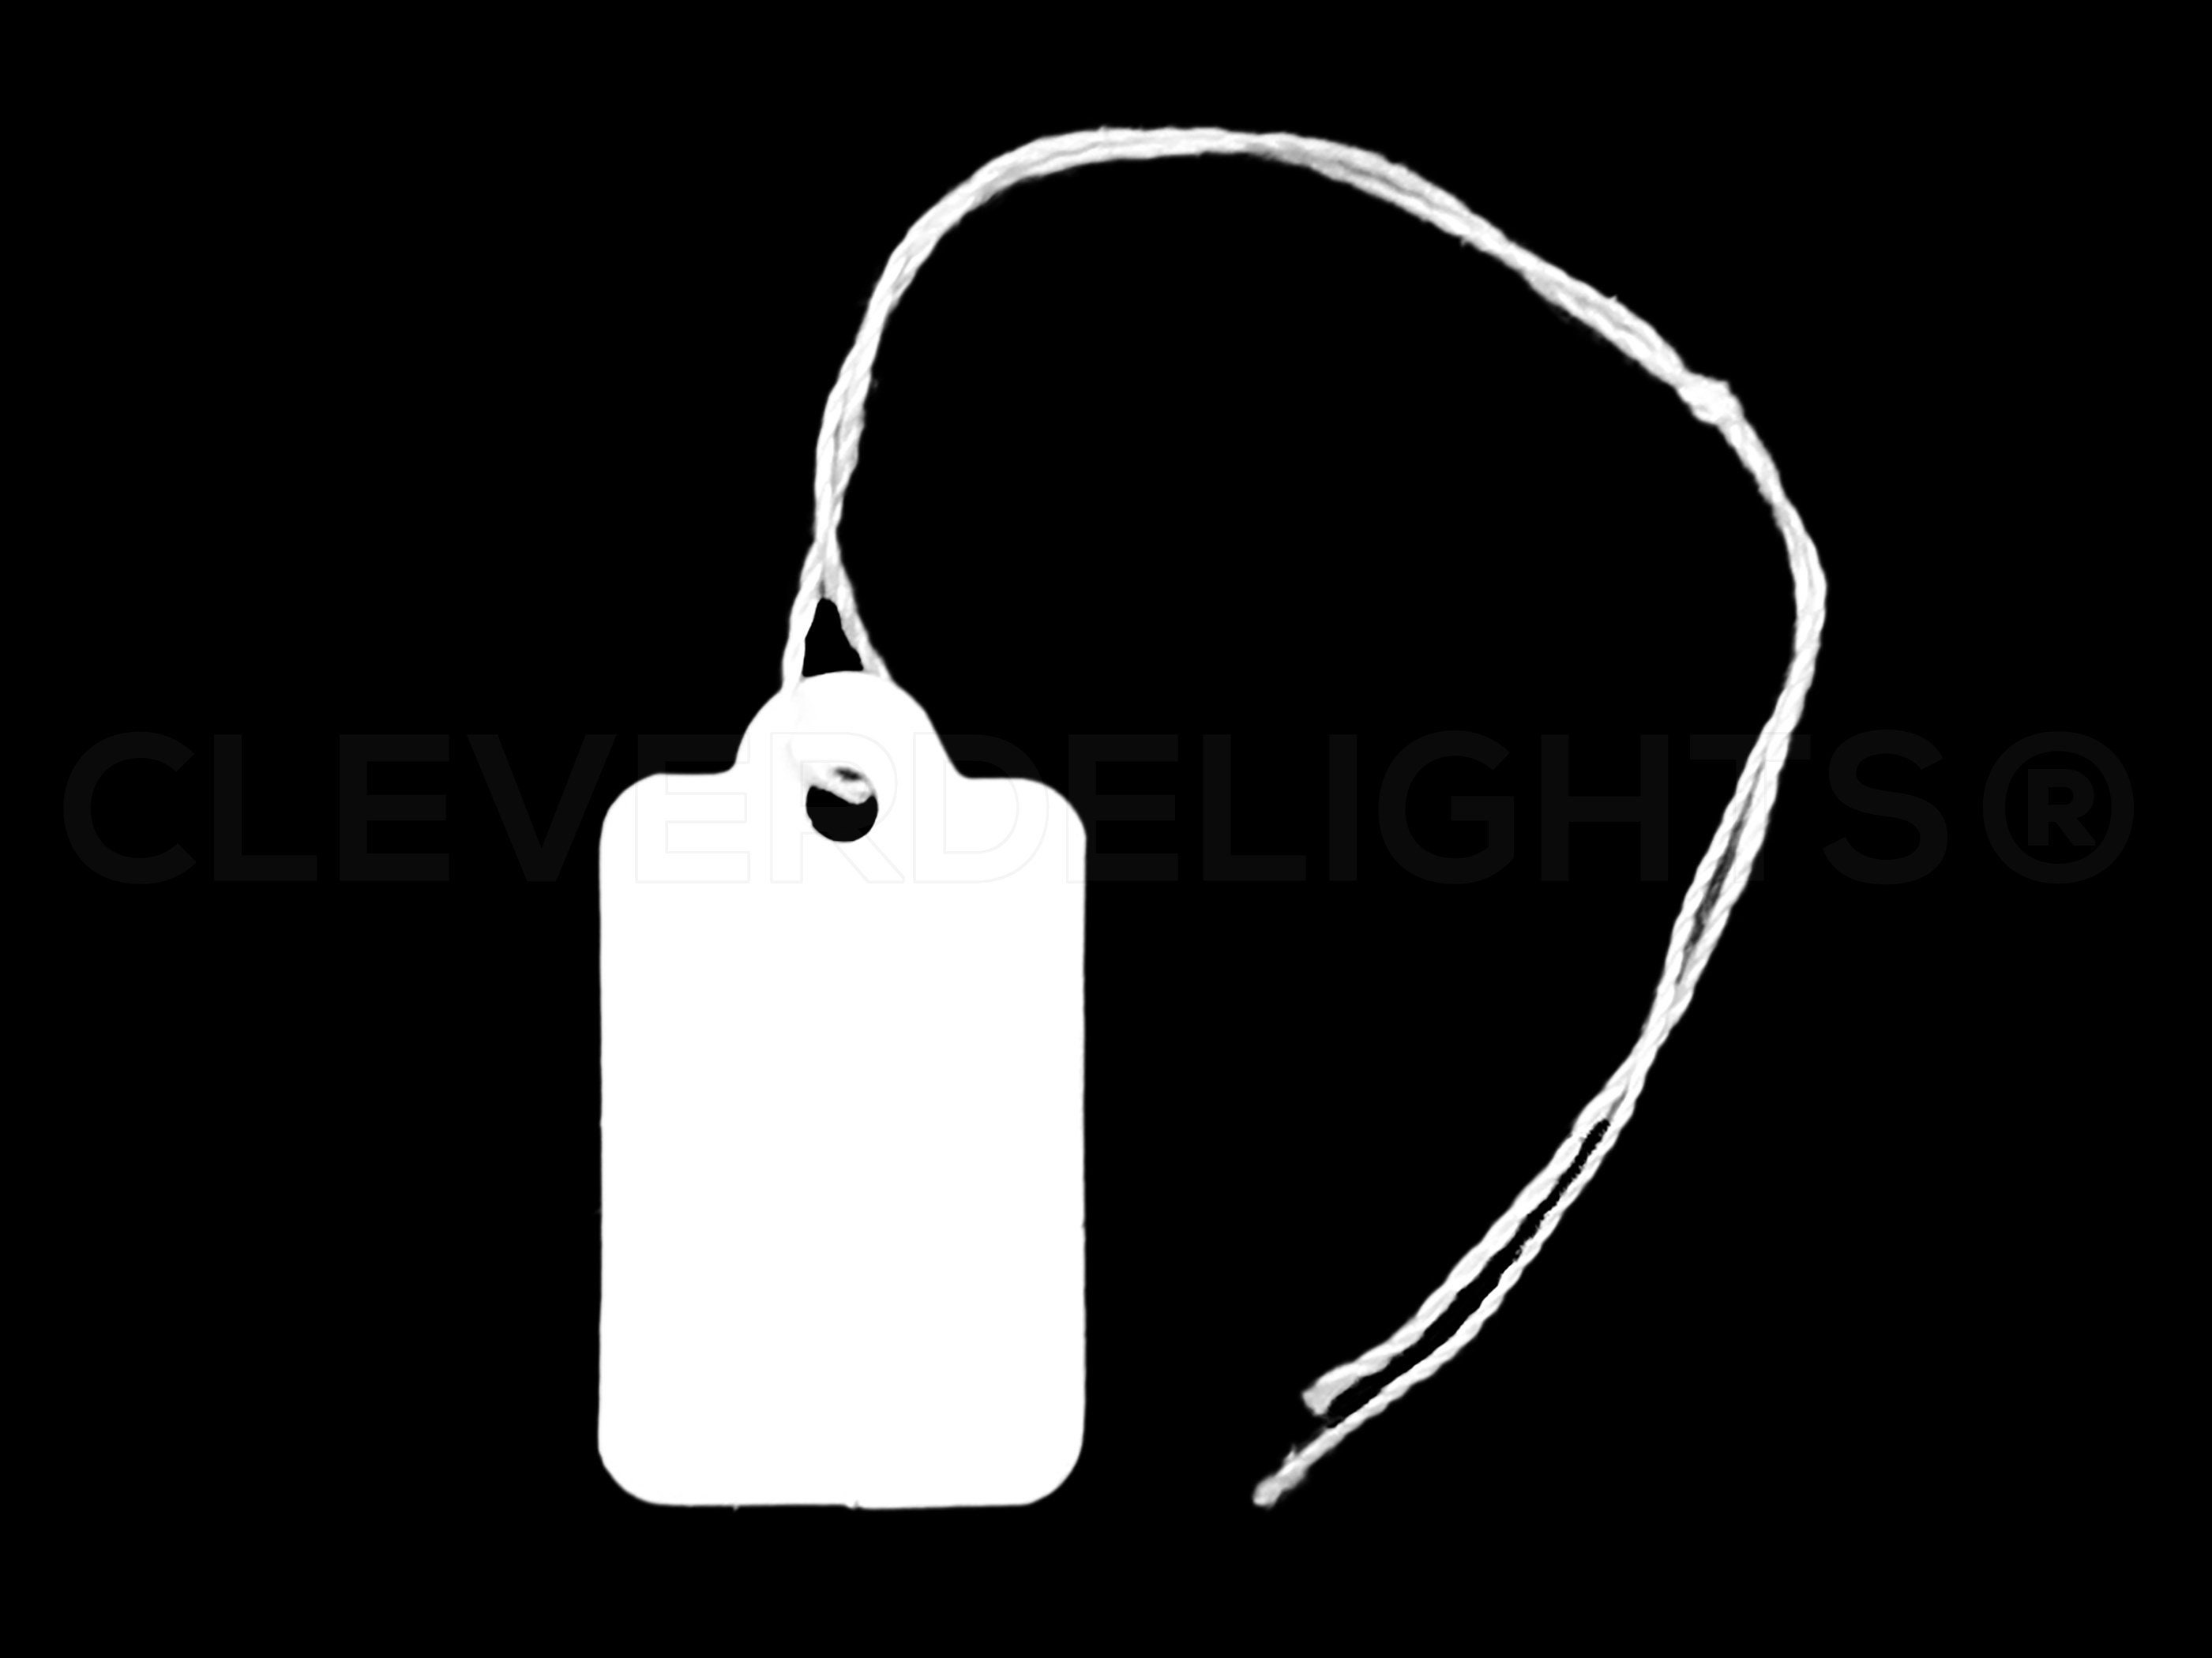 Jewelry Price Tags Blank White Rectangular Tags Set of 100 